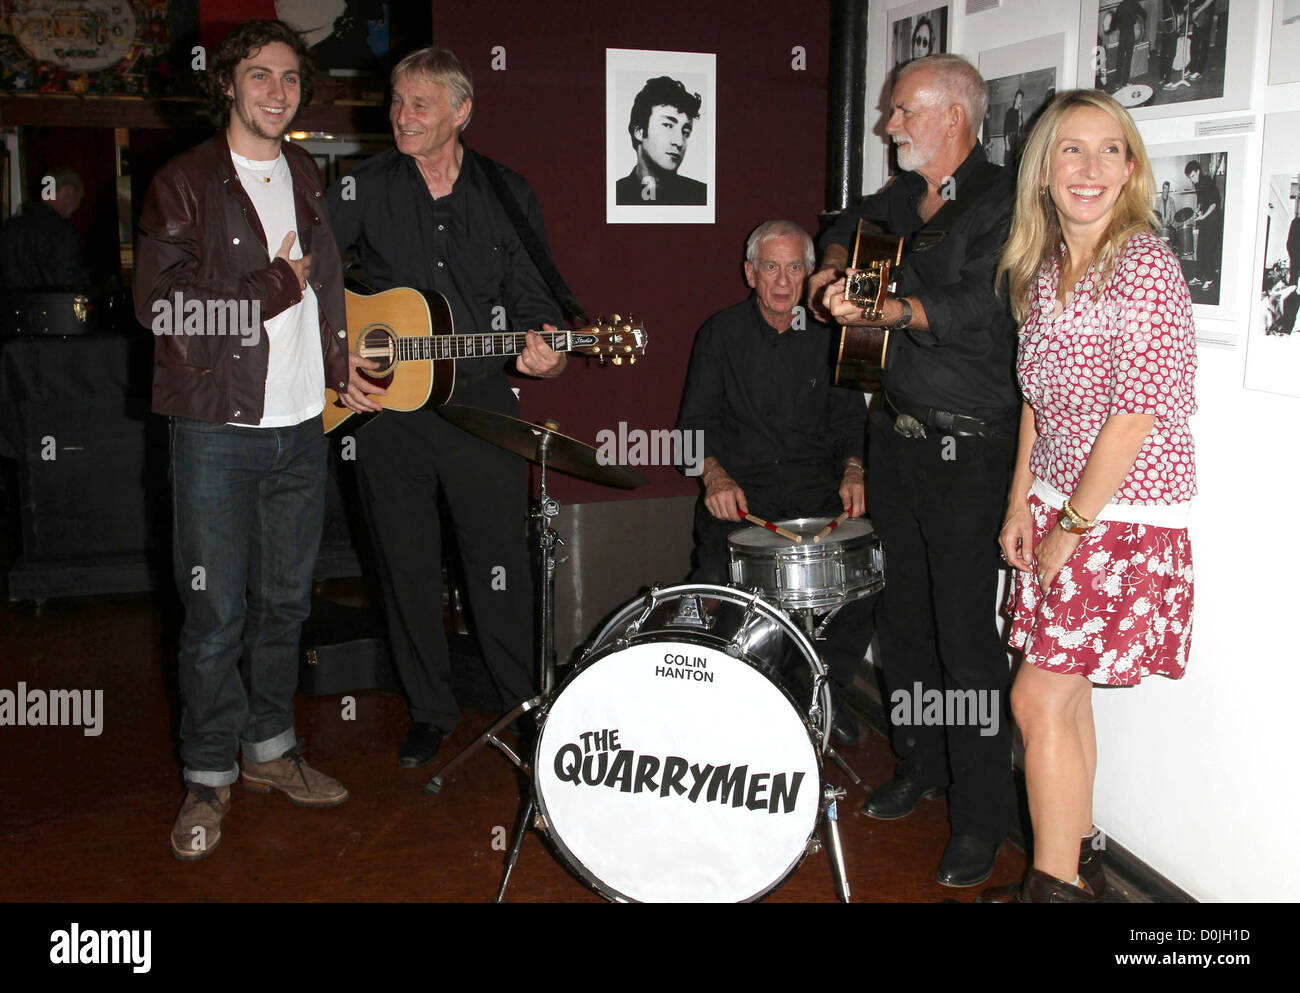 The Quarrymen' Rod Davis, Len Garry and Colin Hanton with Aaron Johnson and Sam Taylor-Wood The launch of 'This Boy: John Stock Photo